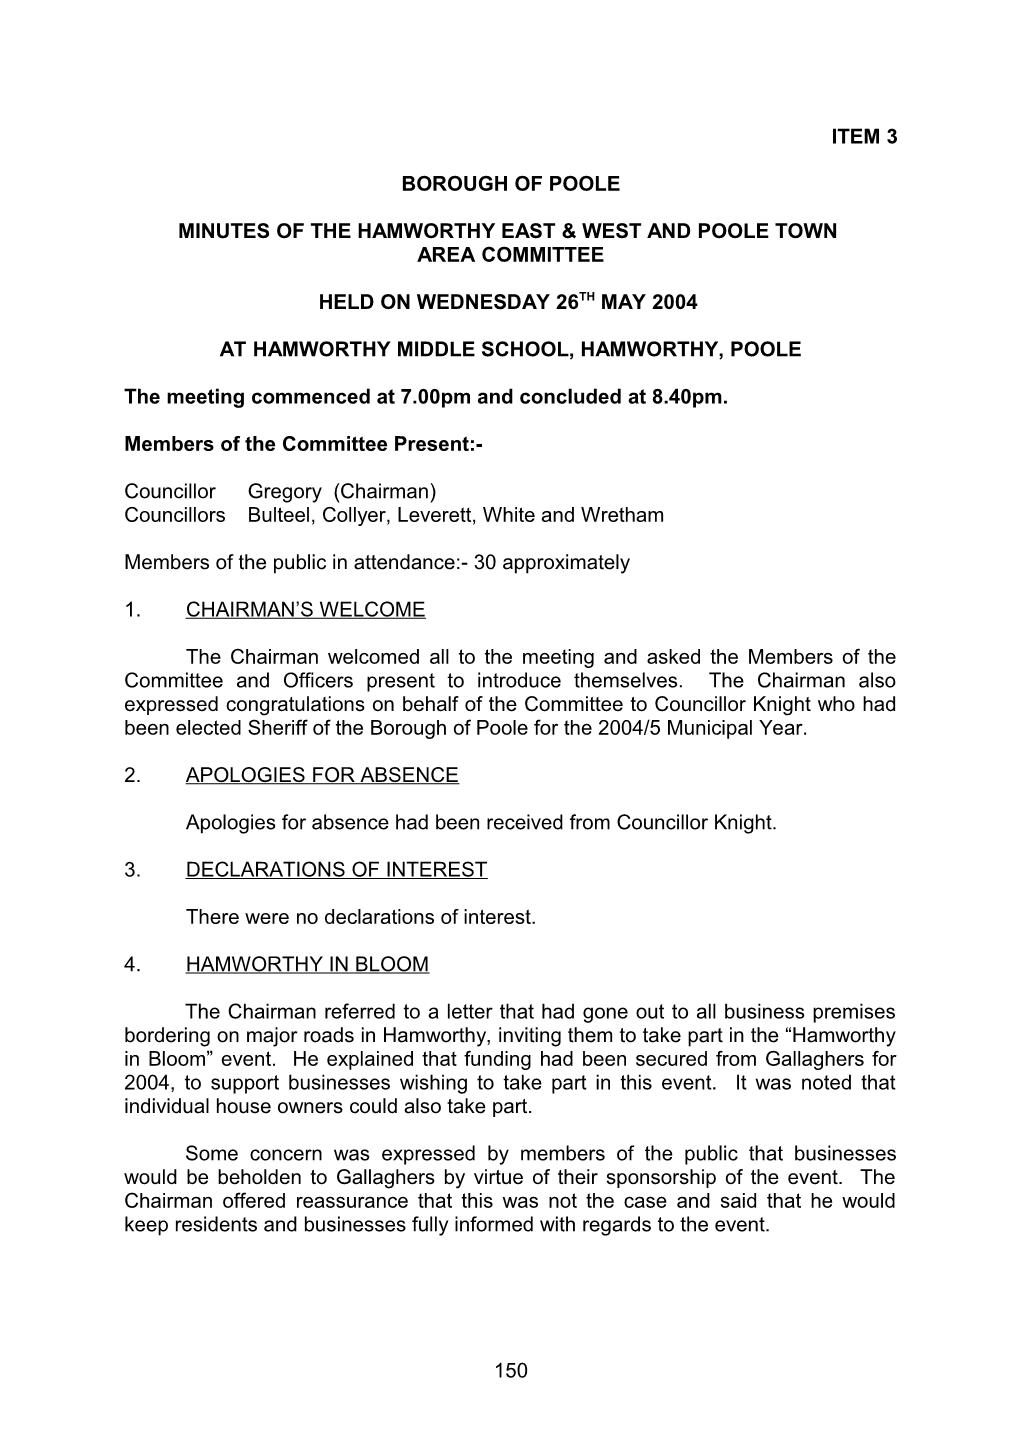 Minutes - Hamworthy East and West and Poole Town Area Committee - 26 May 2004